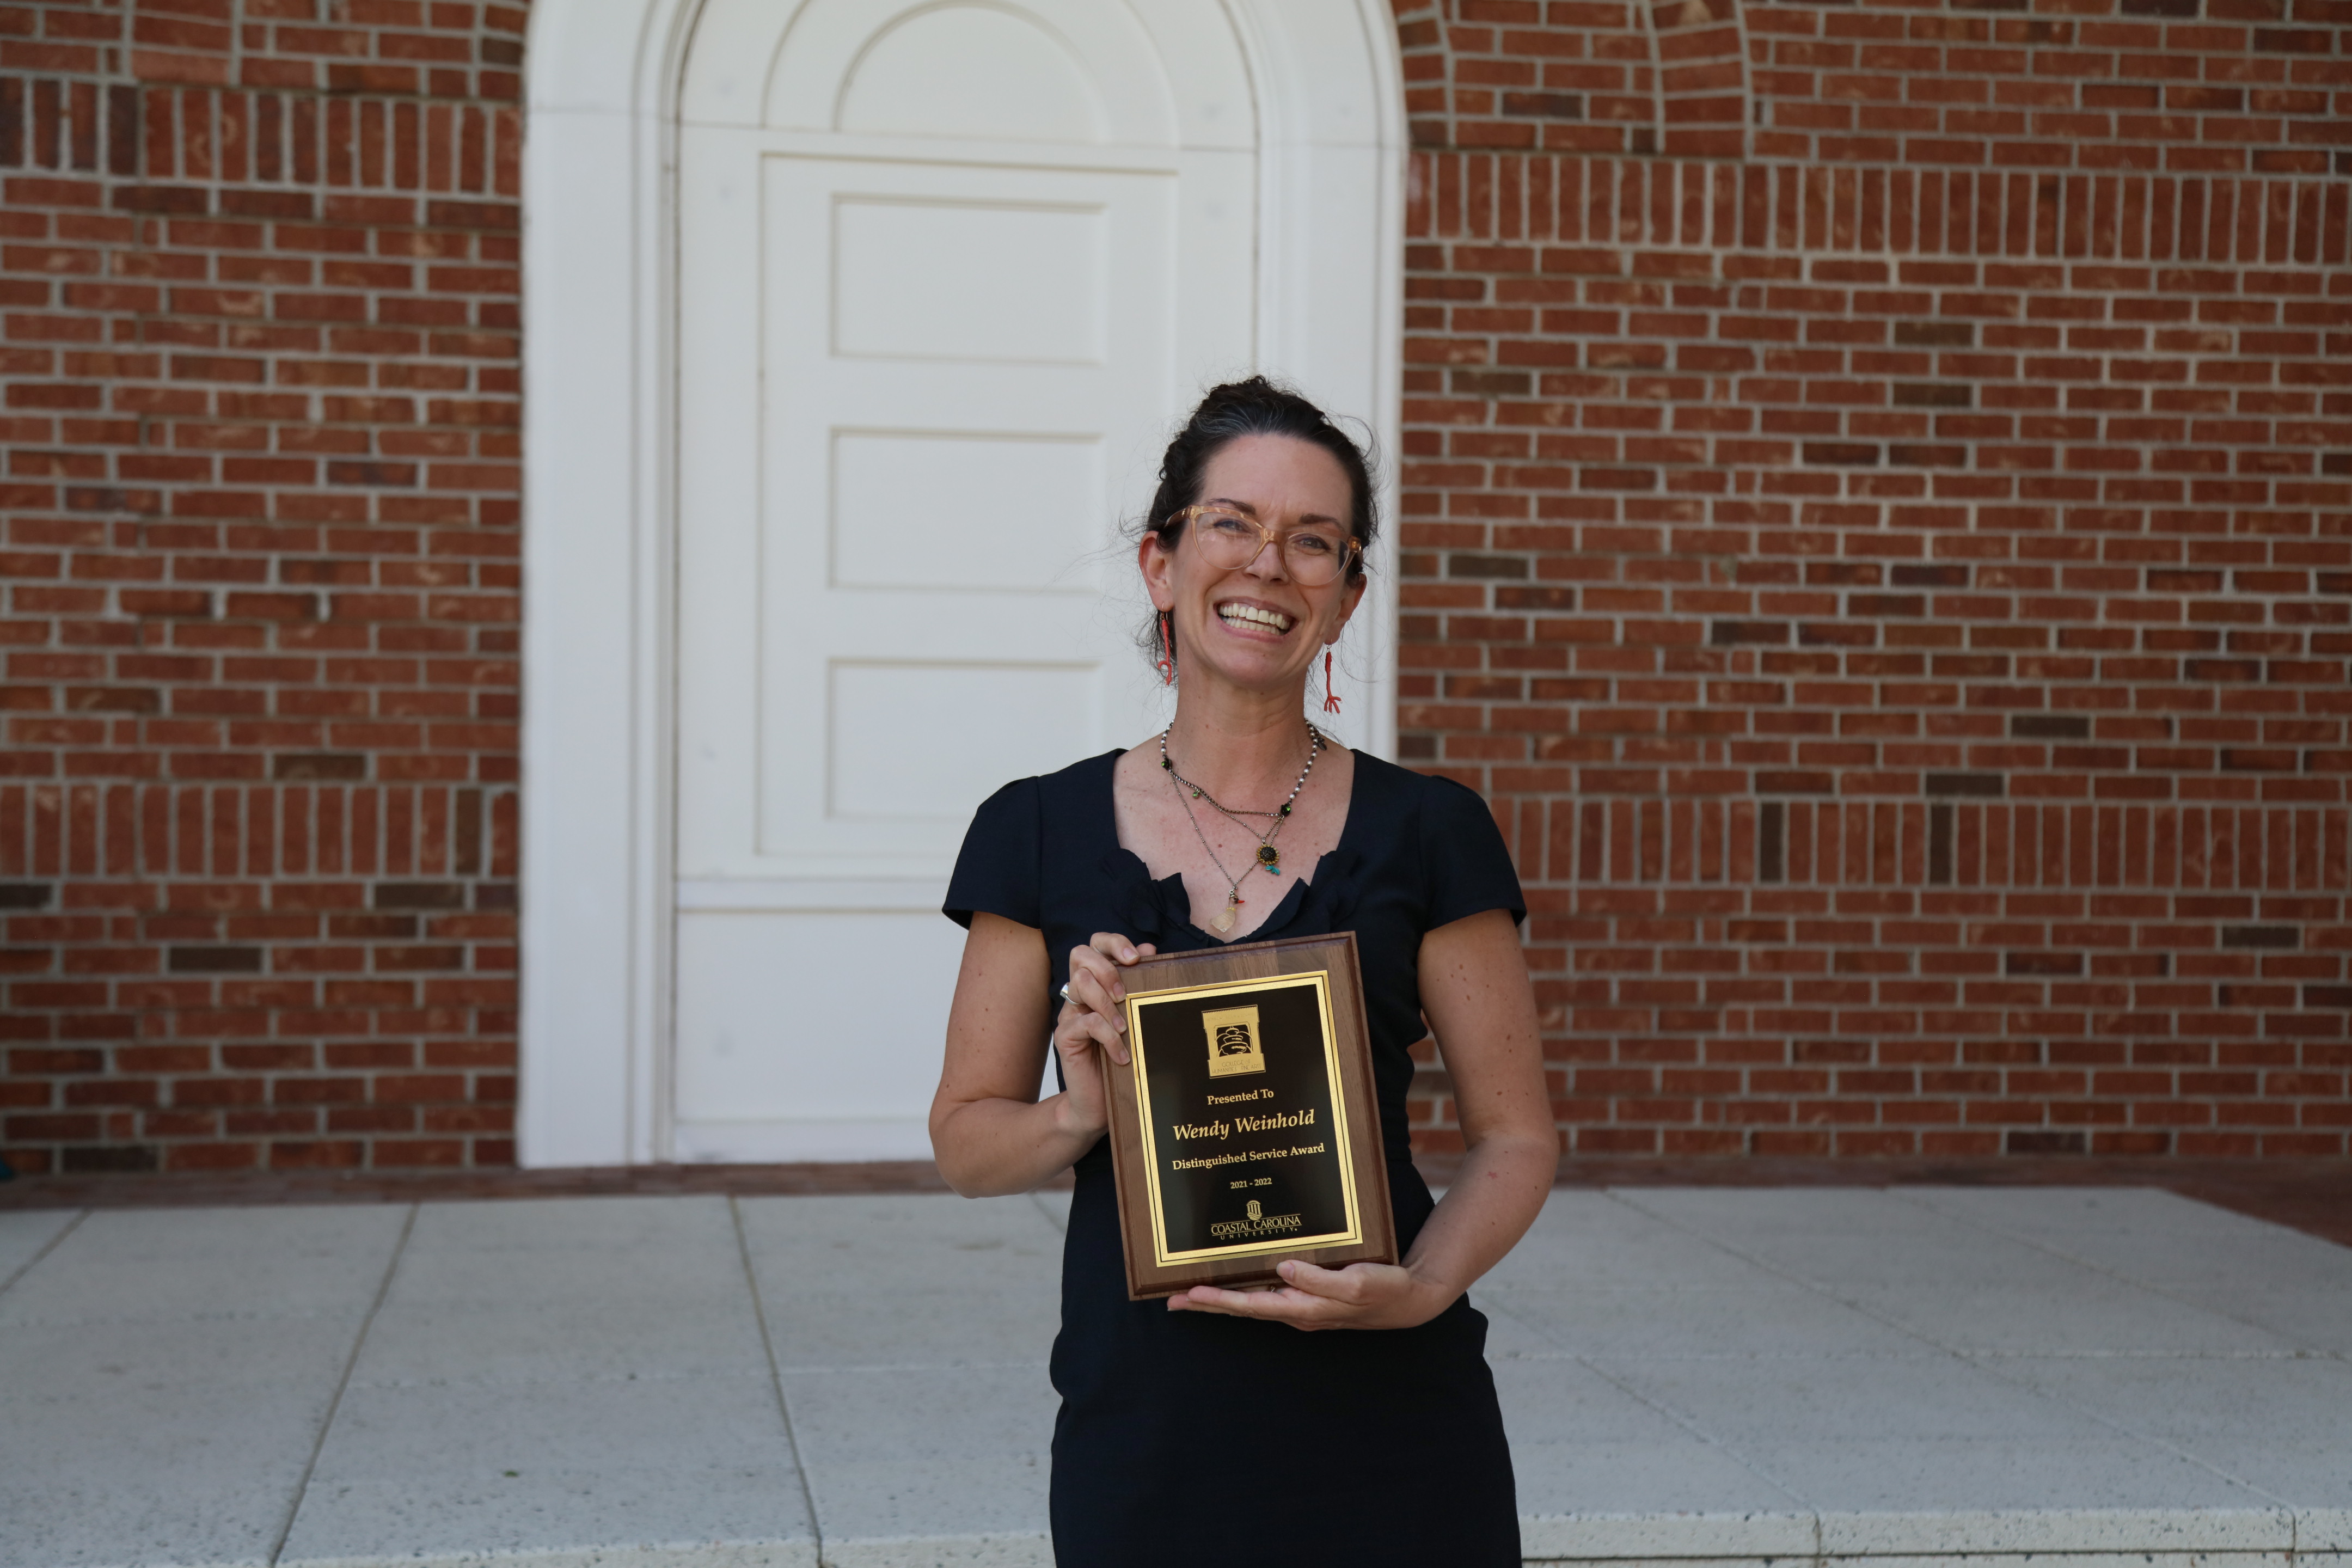 Image of Dr. Wendy Weinhold holding an award